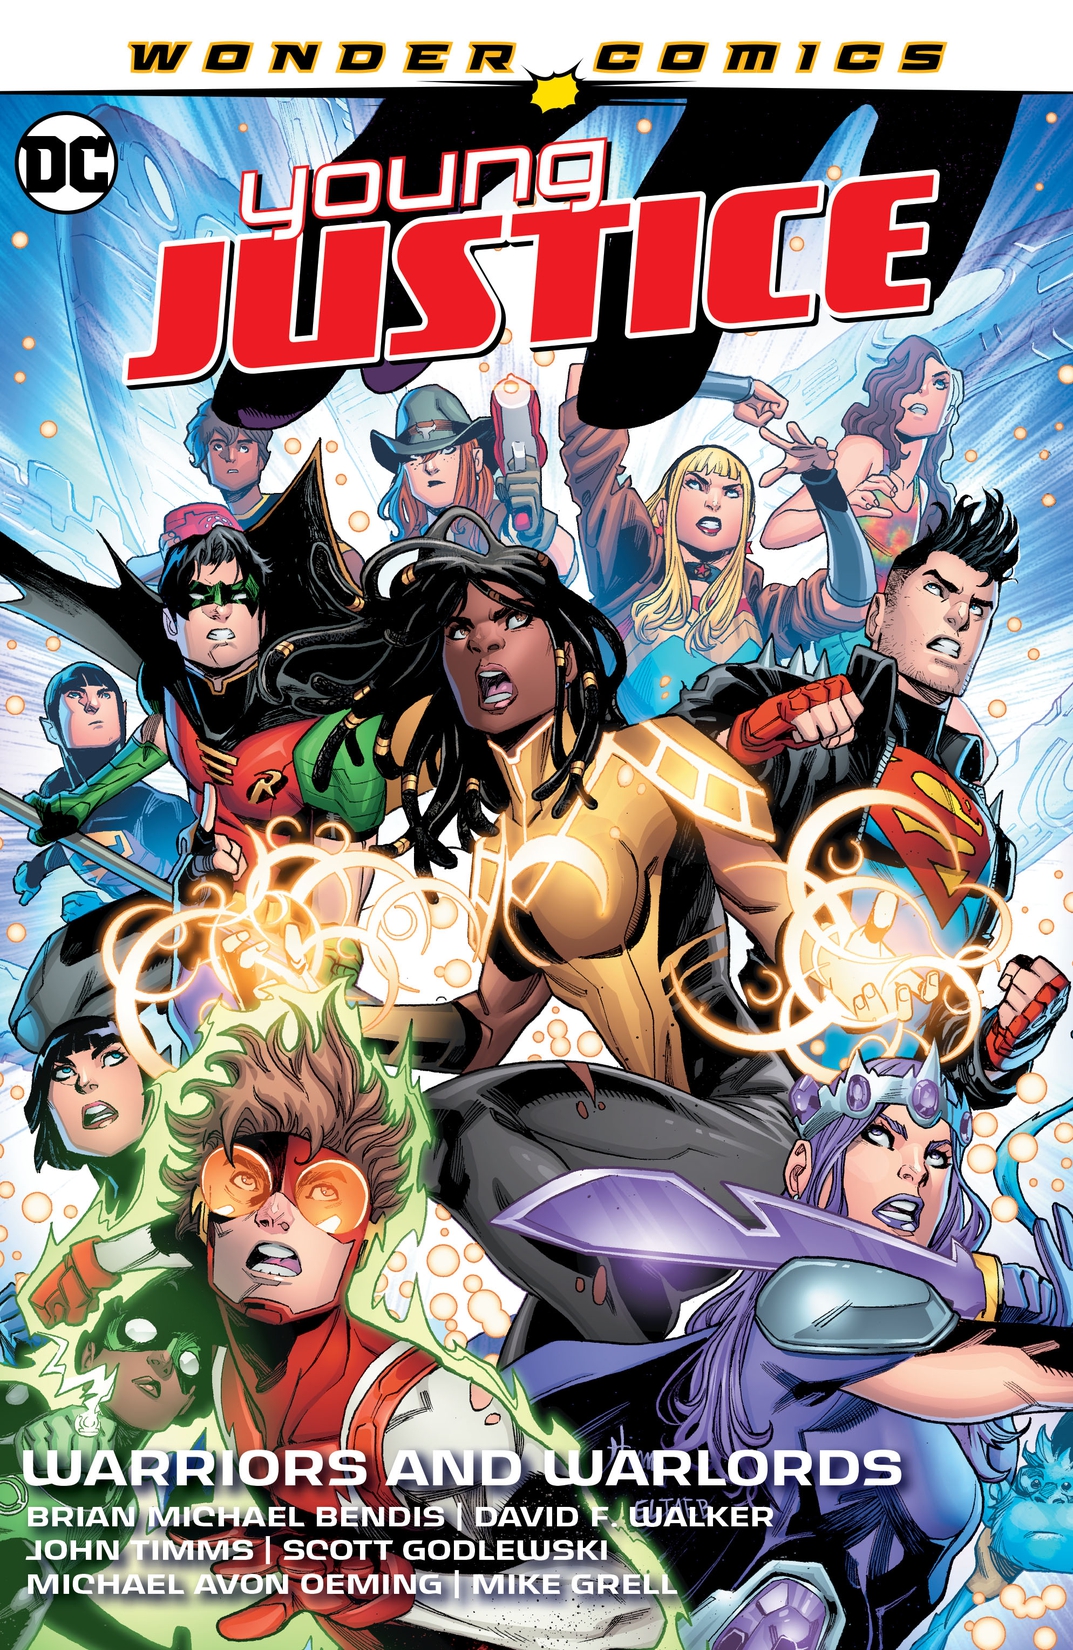 Young Justice Vol. 3: Warriors and Warlords preview images